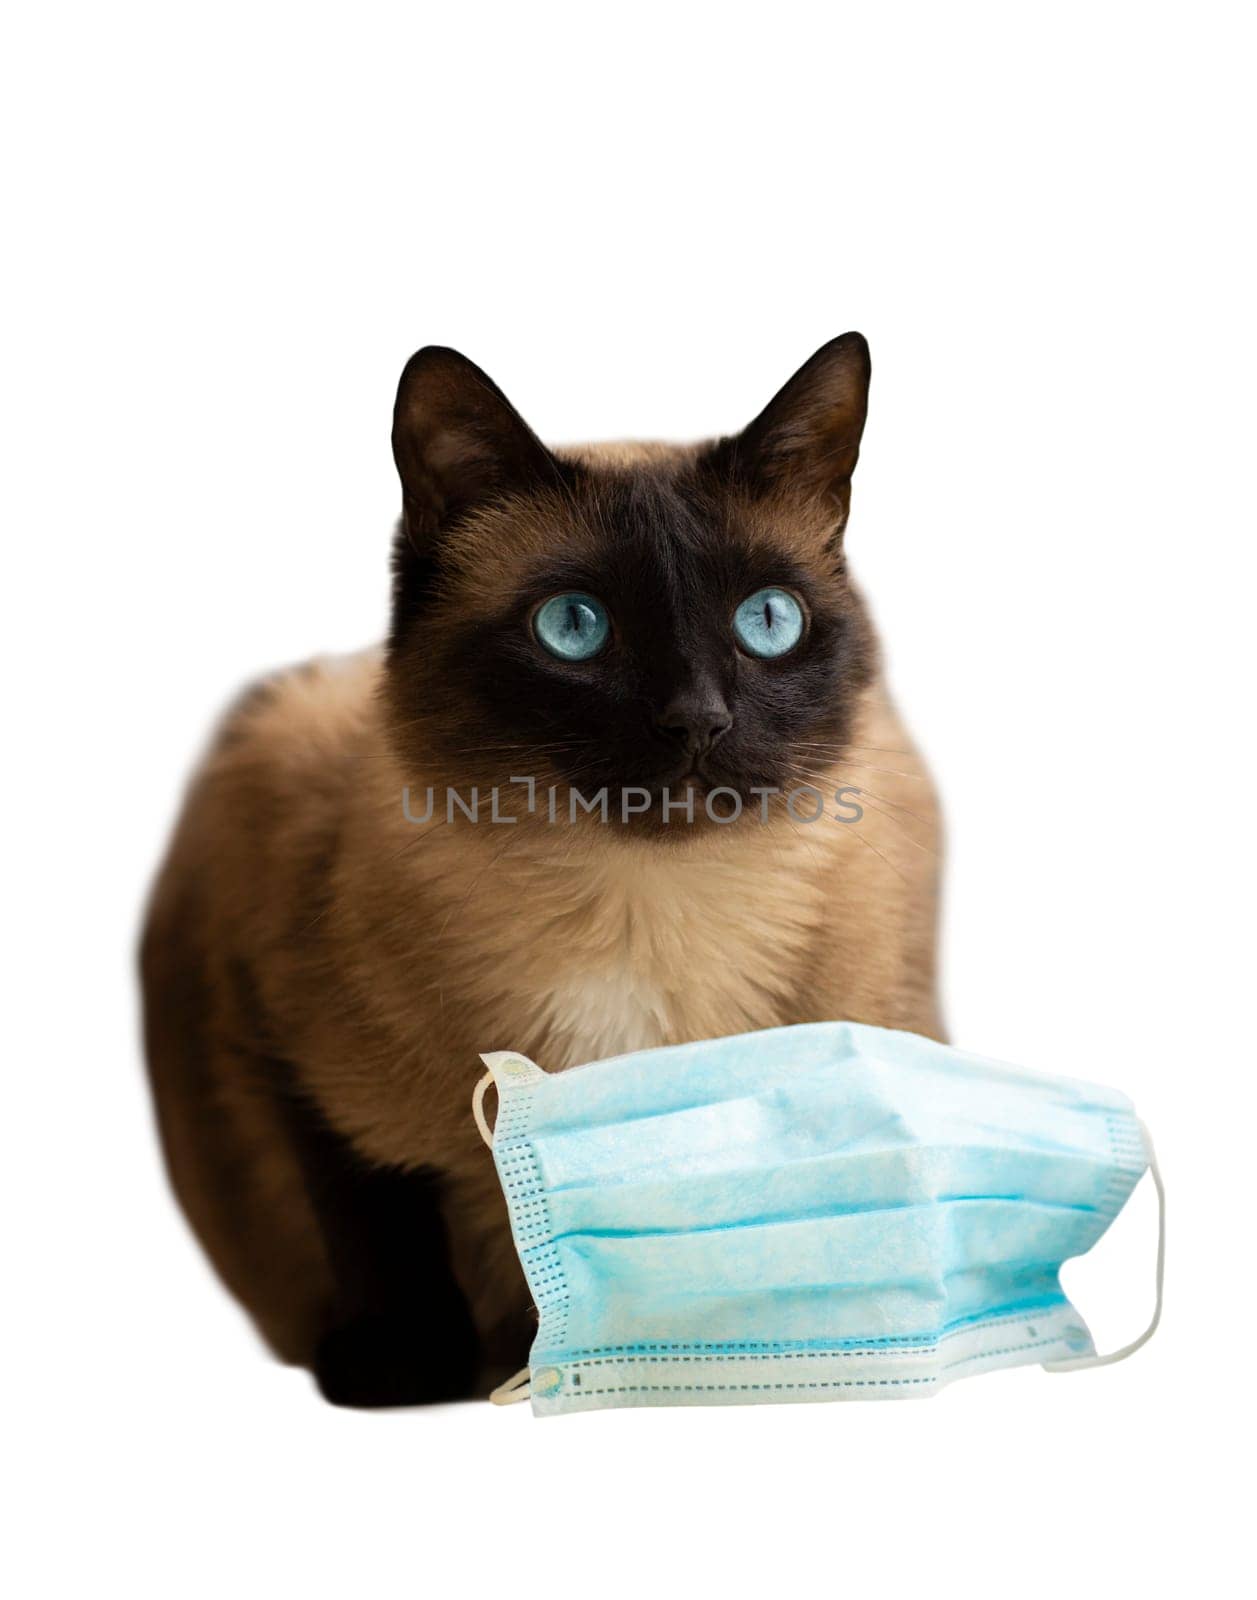 Cat and protective facial mask  during quarantine. Isolated over white background